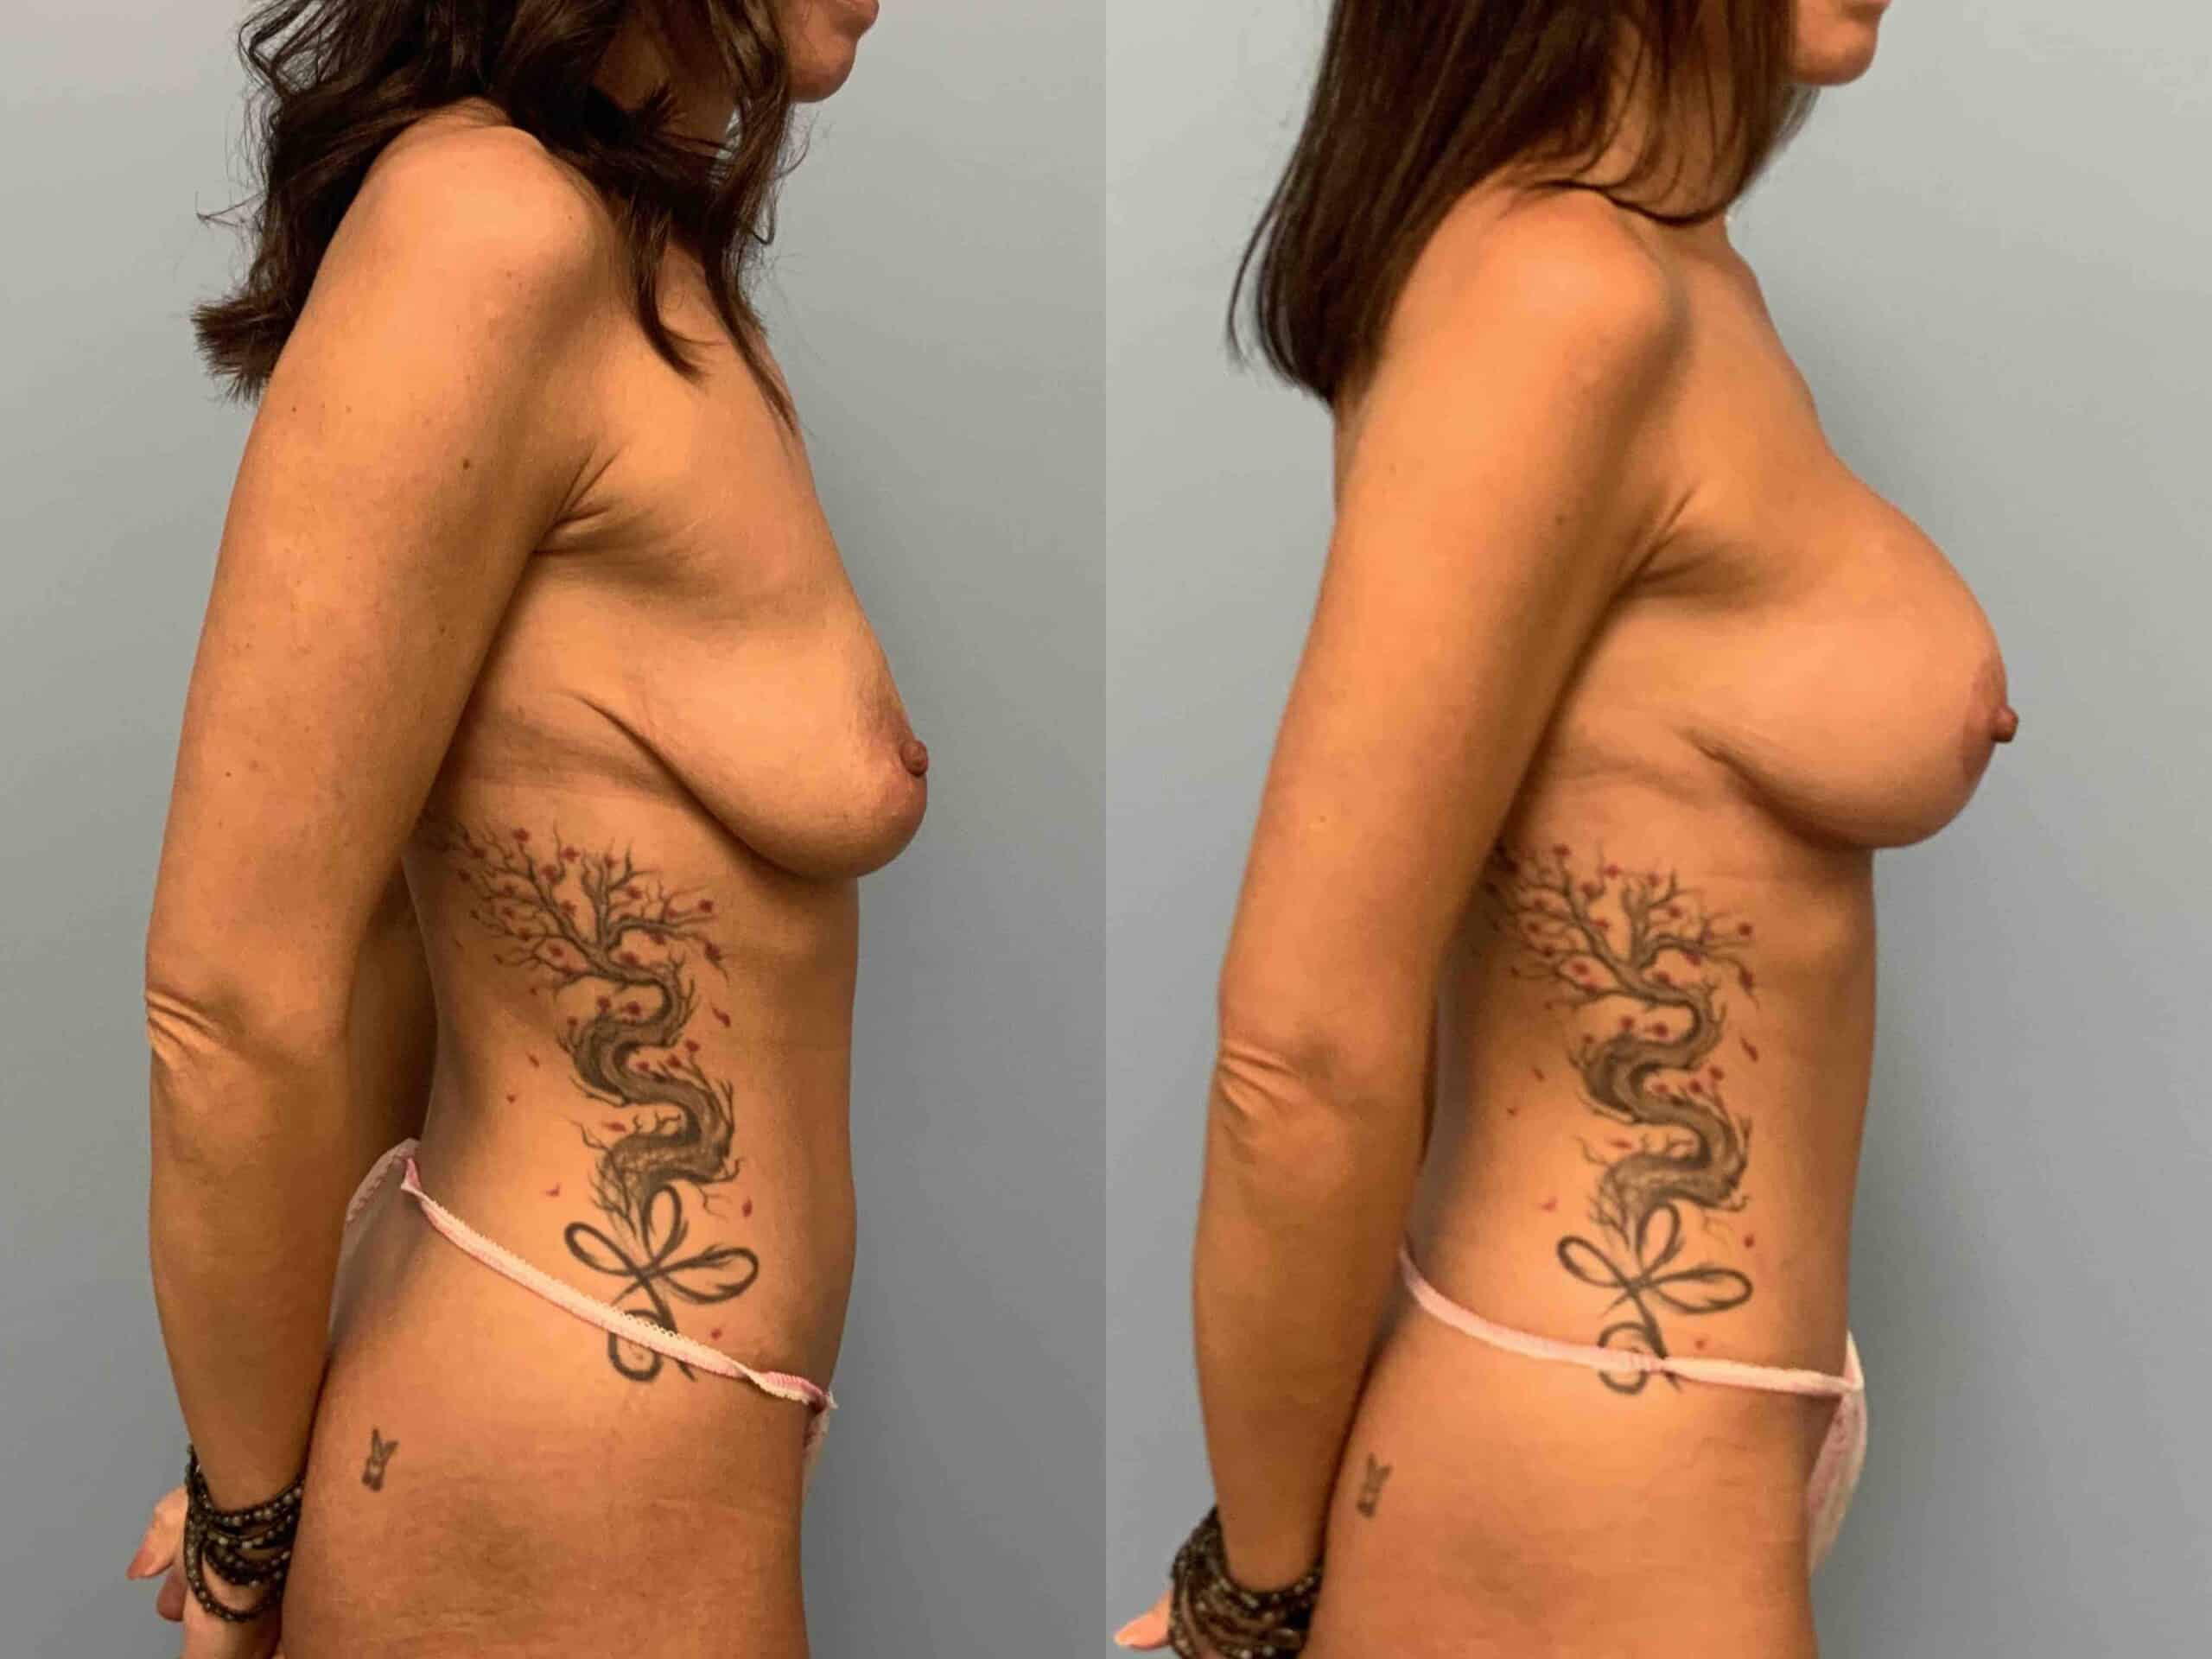 Side view of before and after 3 mo post op from Breast Augmentation, Breast Lift, Tummy Tuck, Monsplasty performed by Dr. Paul Vanek